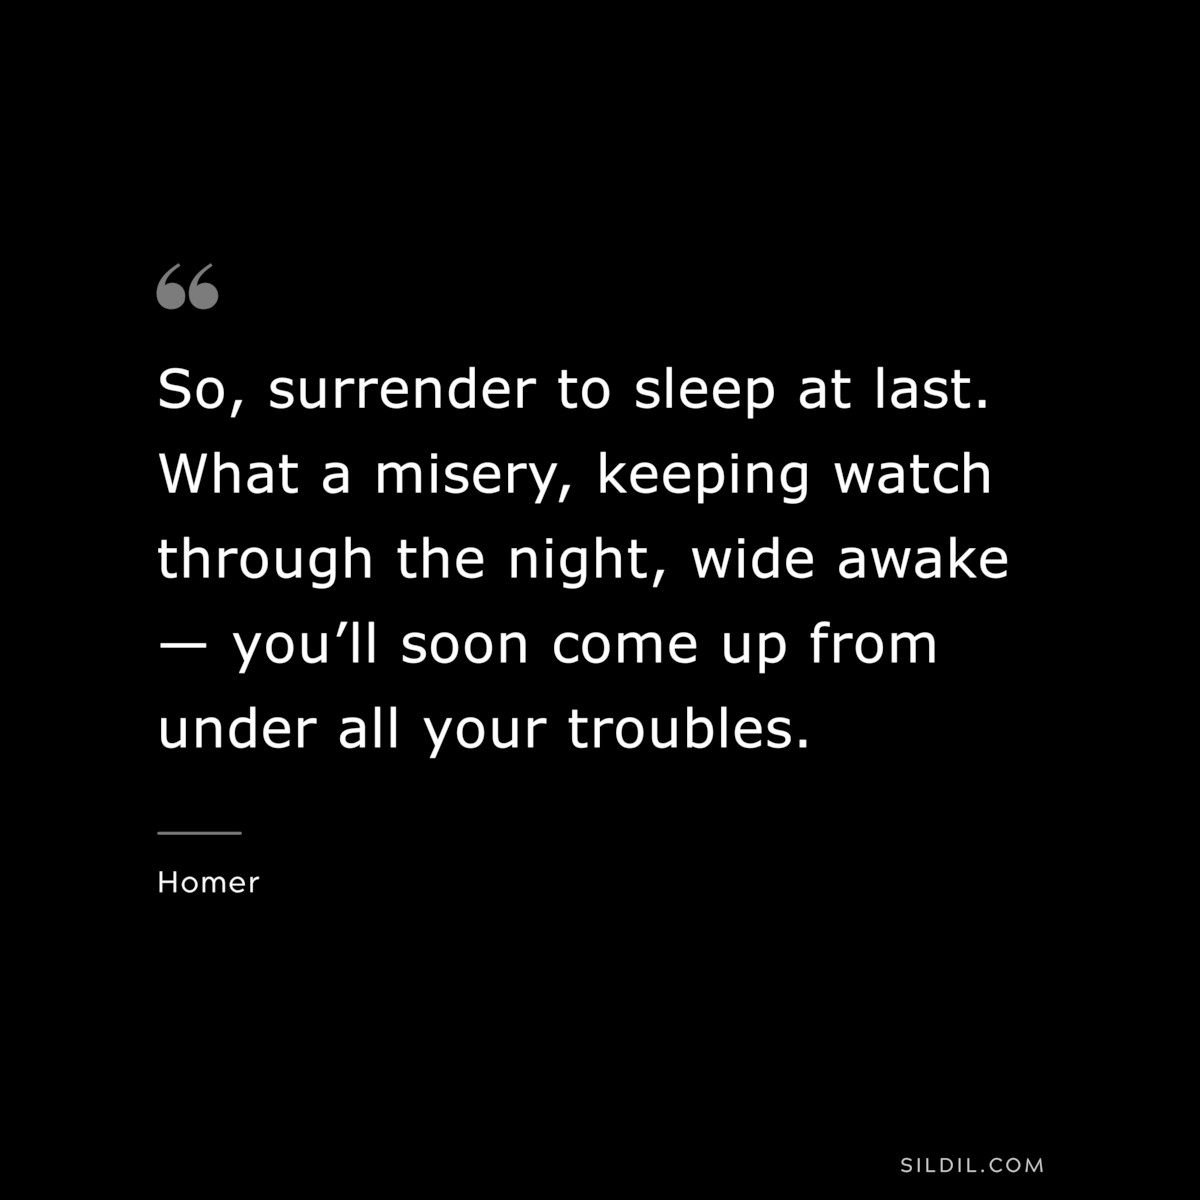 So, surrender to sleep at last. What a misery, keeping watch through the night, wide awake — you’ll soon come up from under all your troubles. ― Homer